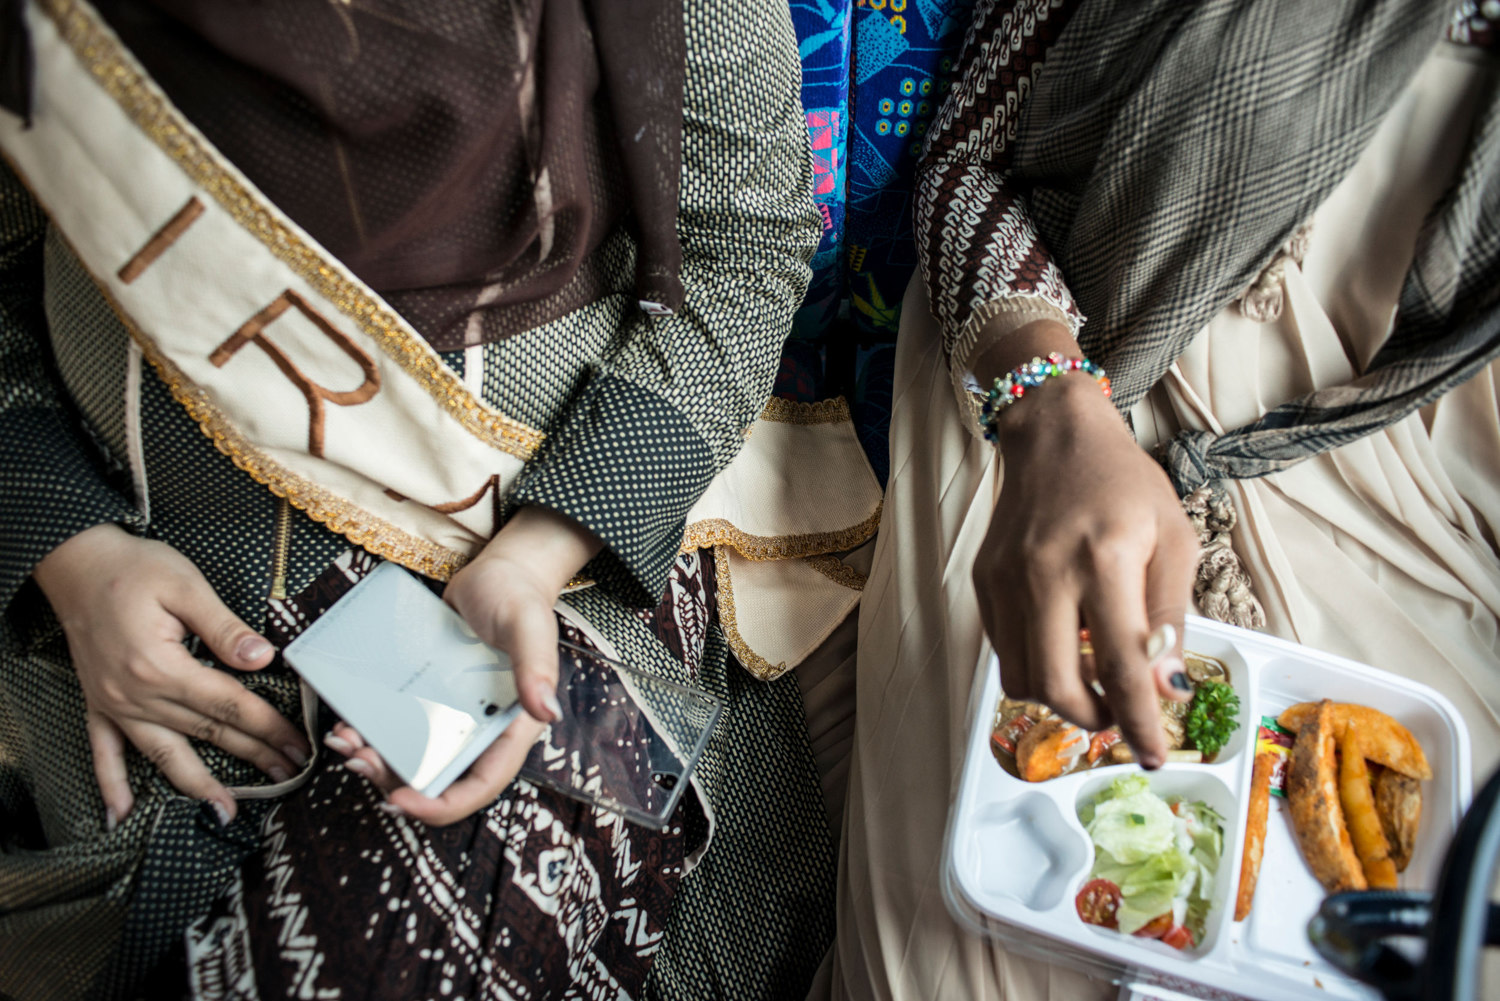  Miss Iran and Miss NIgeria eat lunch on the bus.
 